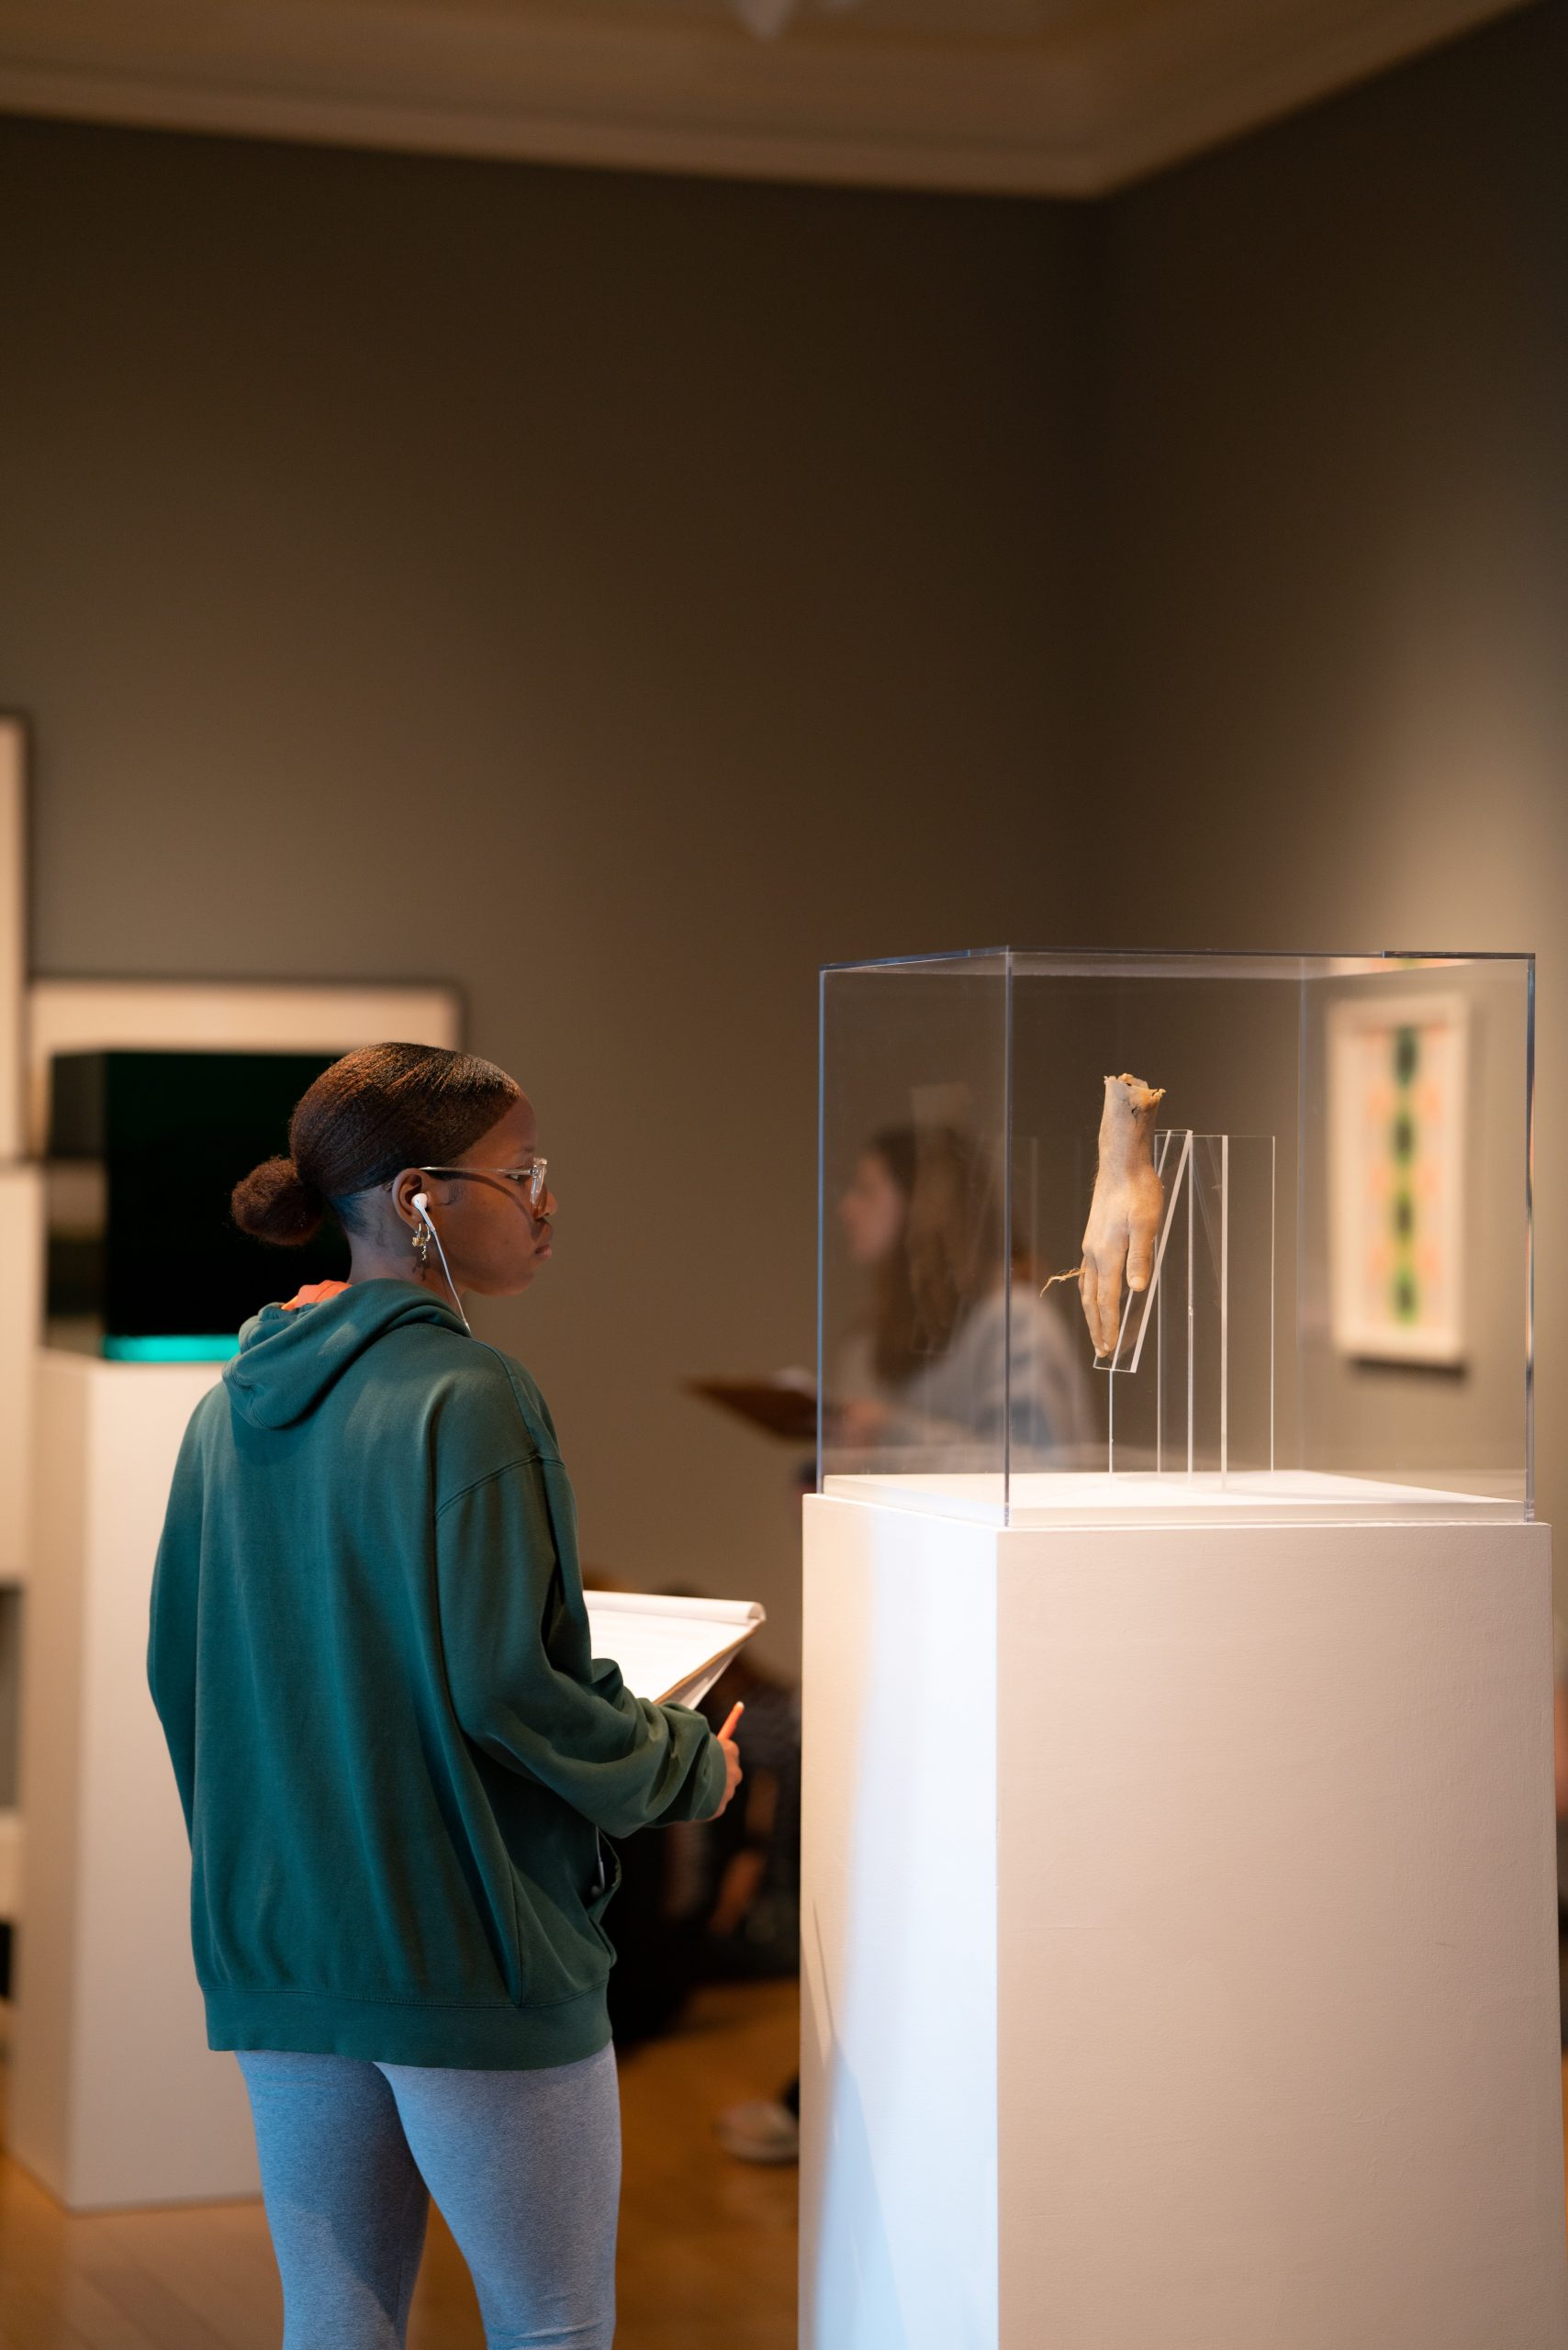 A student looks at a sculpture of a disembodied hand